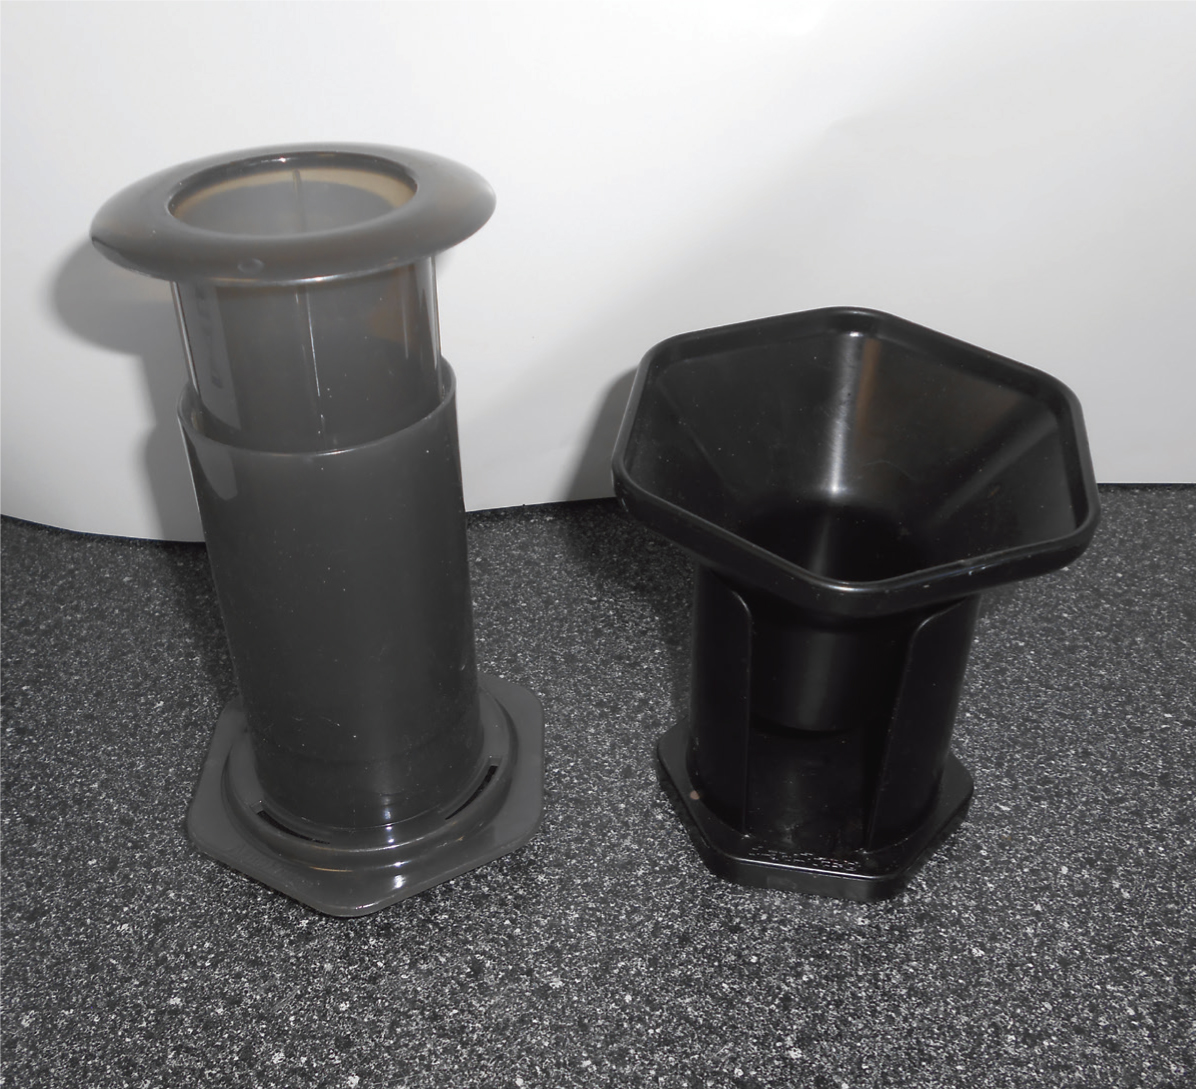 AeroPress forces water through a filter to separate the extract.